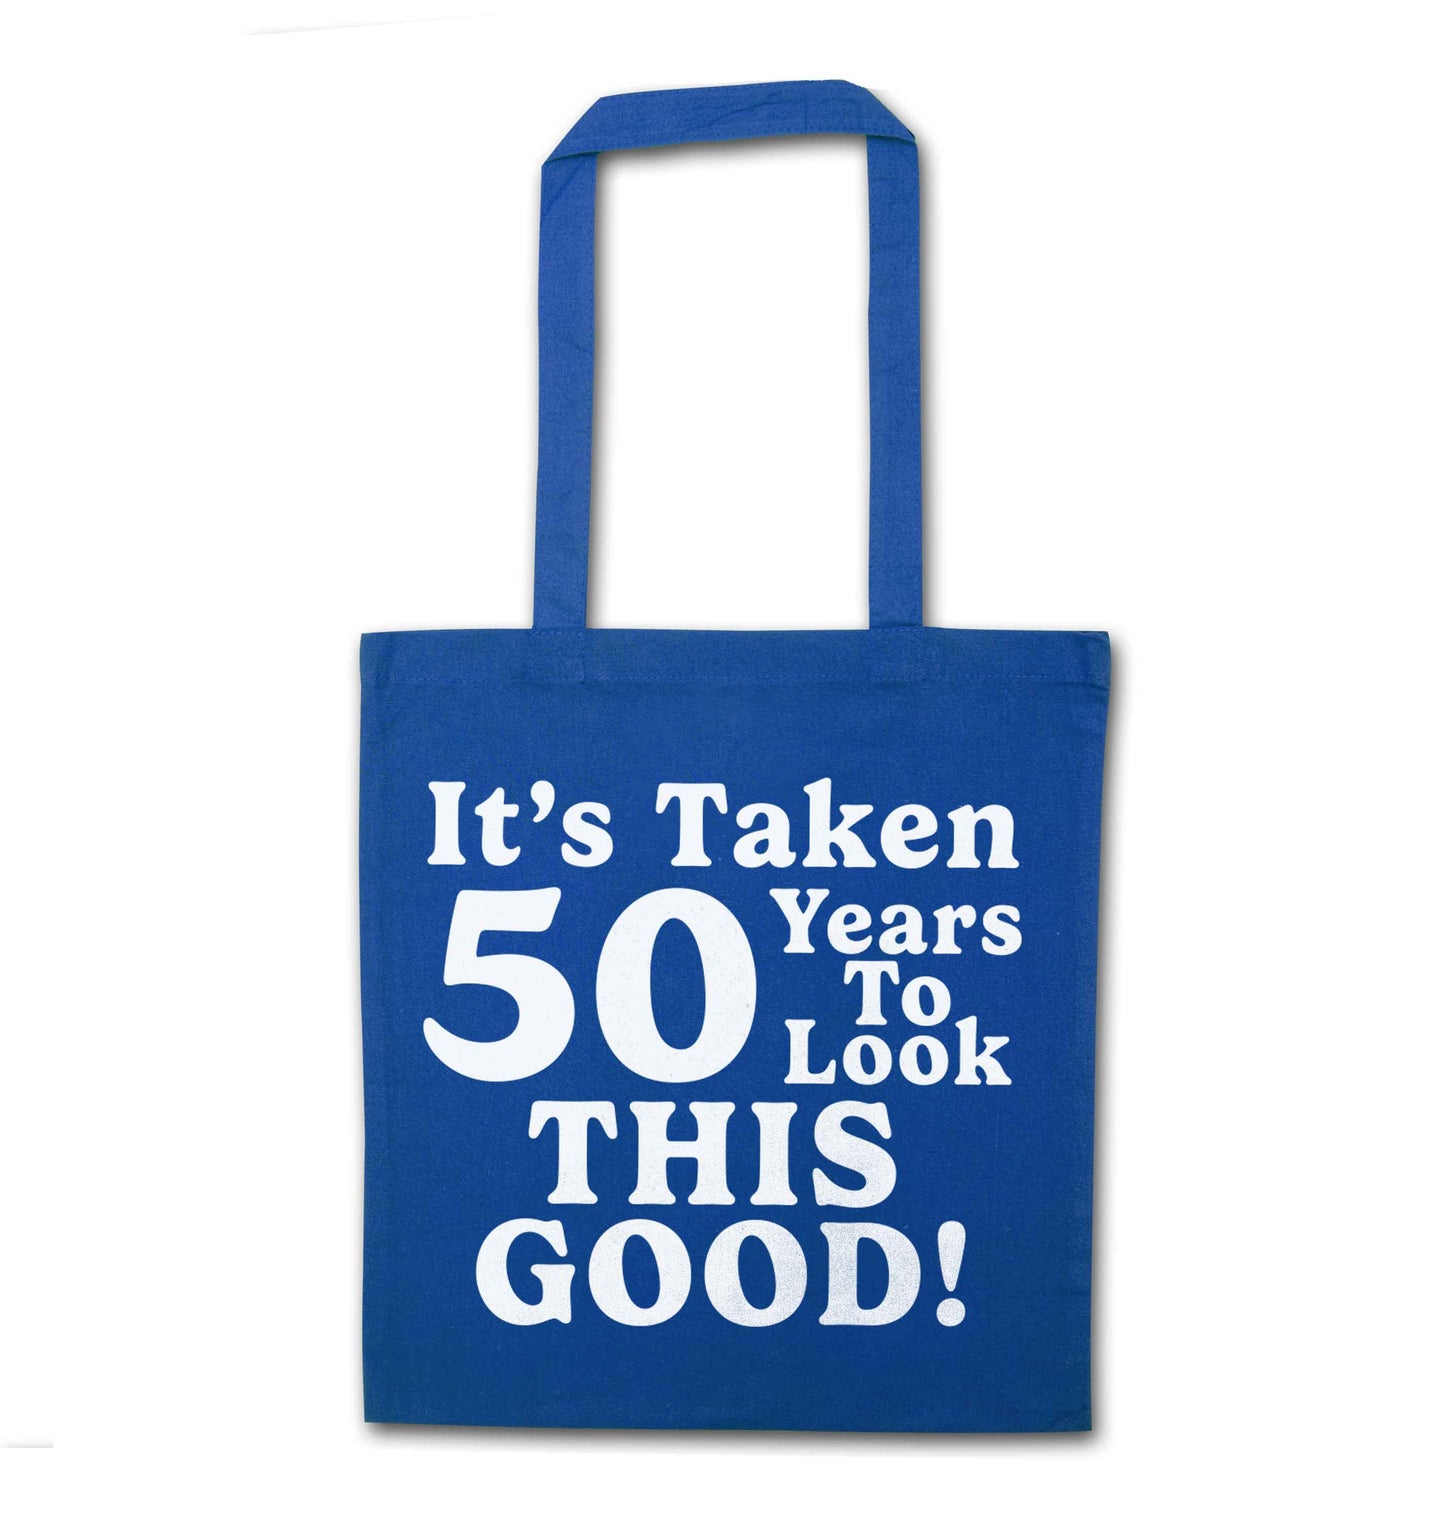 It's taken 50 years to look this good! blue tote bag